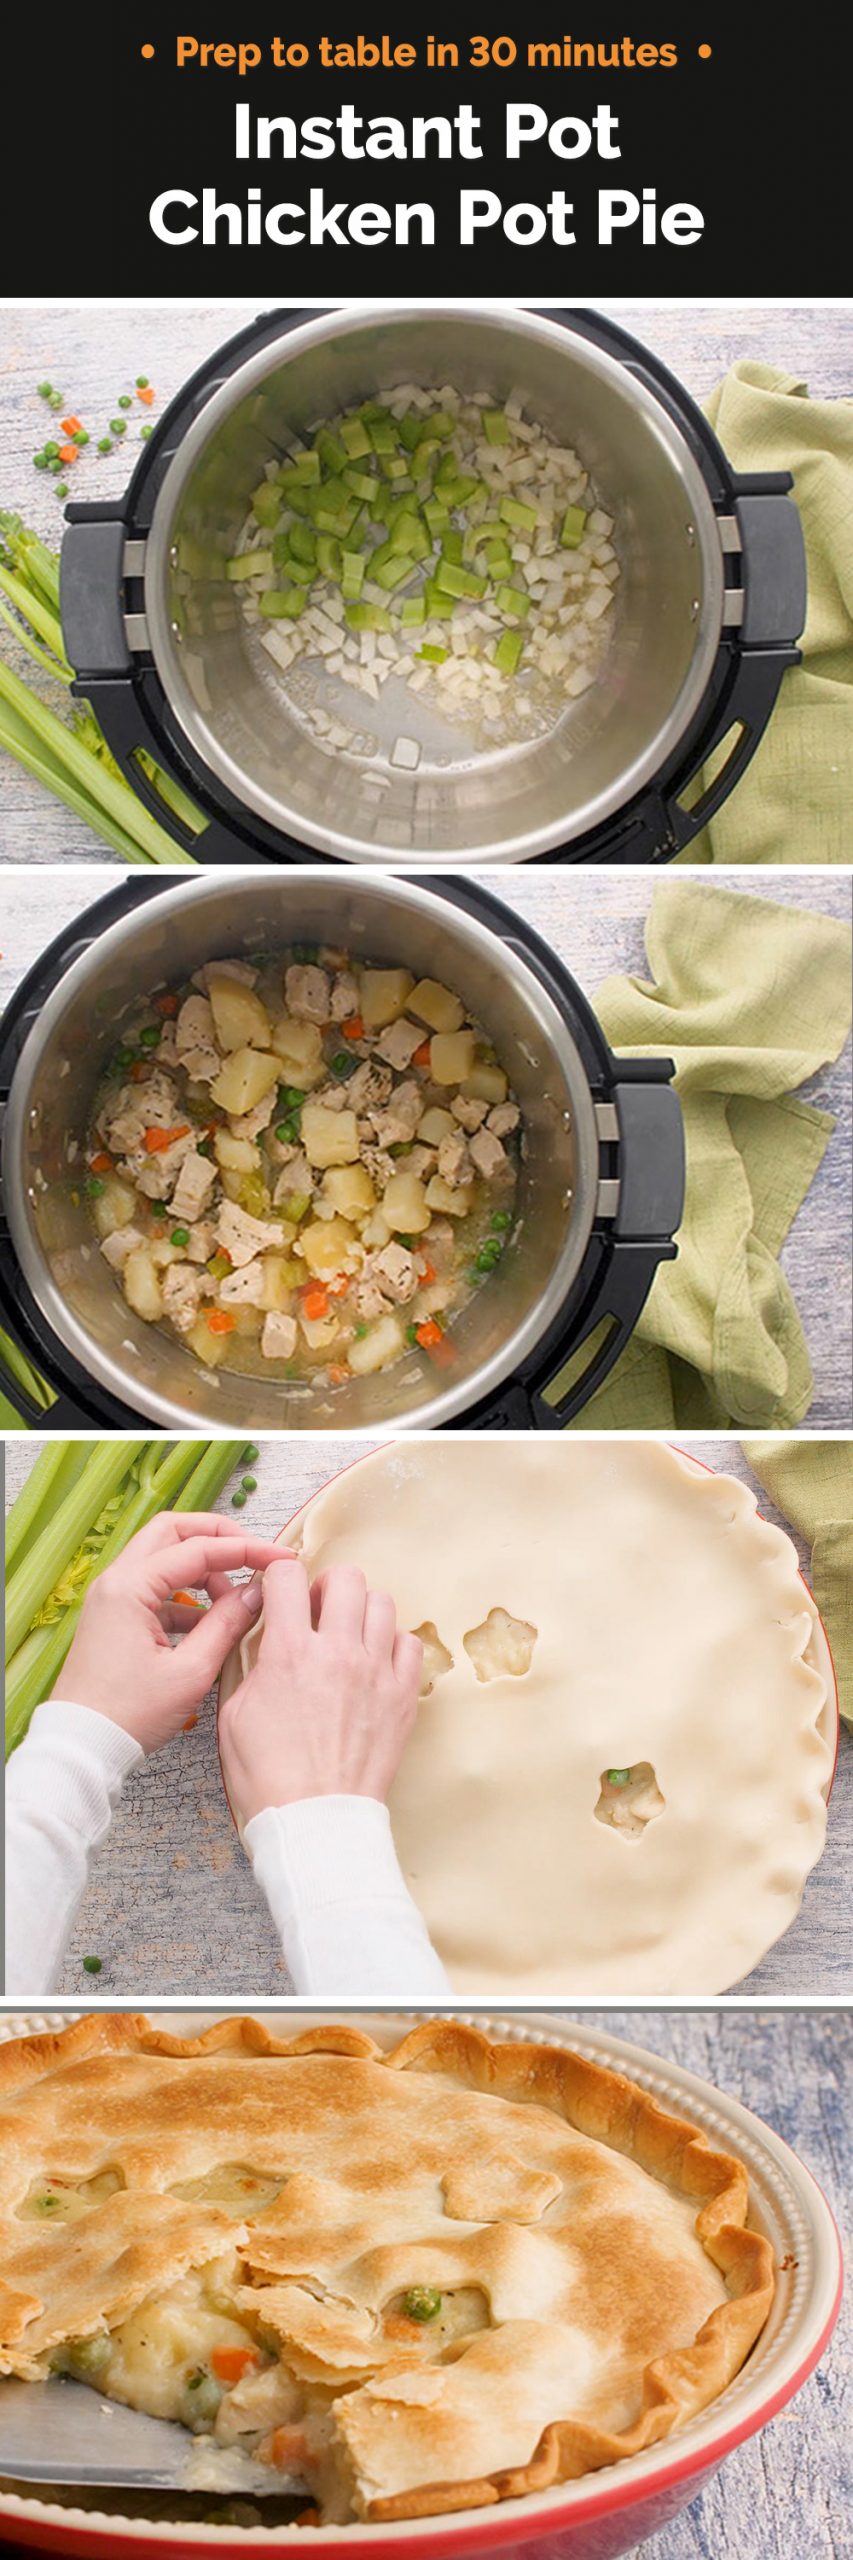 Instant Pot / Pressure Cooker Chicken Pot Pie features a creamy filling of hearty potatoes, tender chicken, peas, carrots and celery under a flaky golden pie crust. You won't believe how easy it is to put together! | Recipe from #PressureCookingToday | via @PressureCook2da